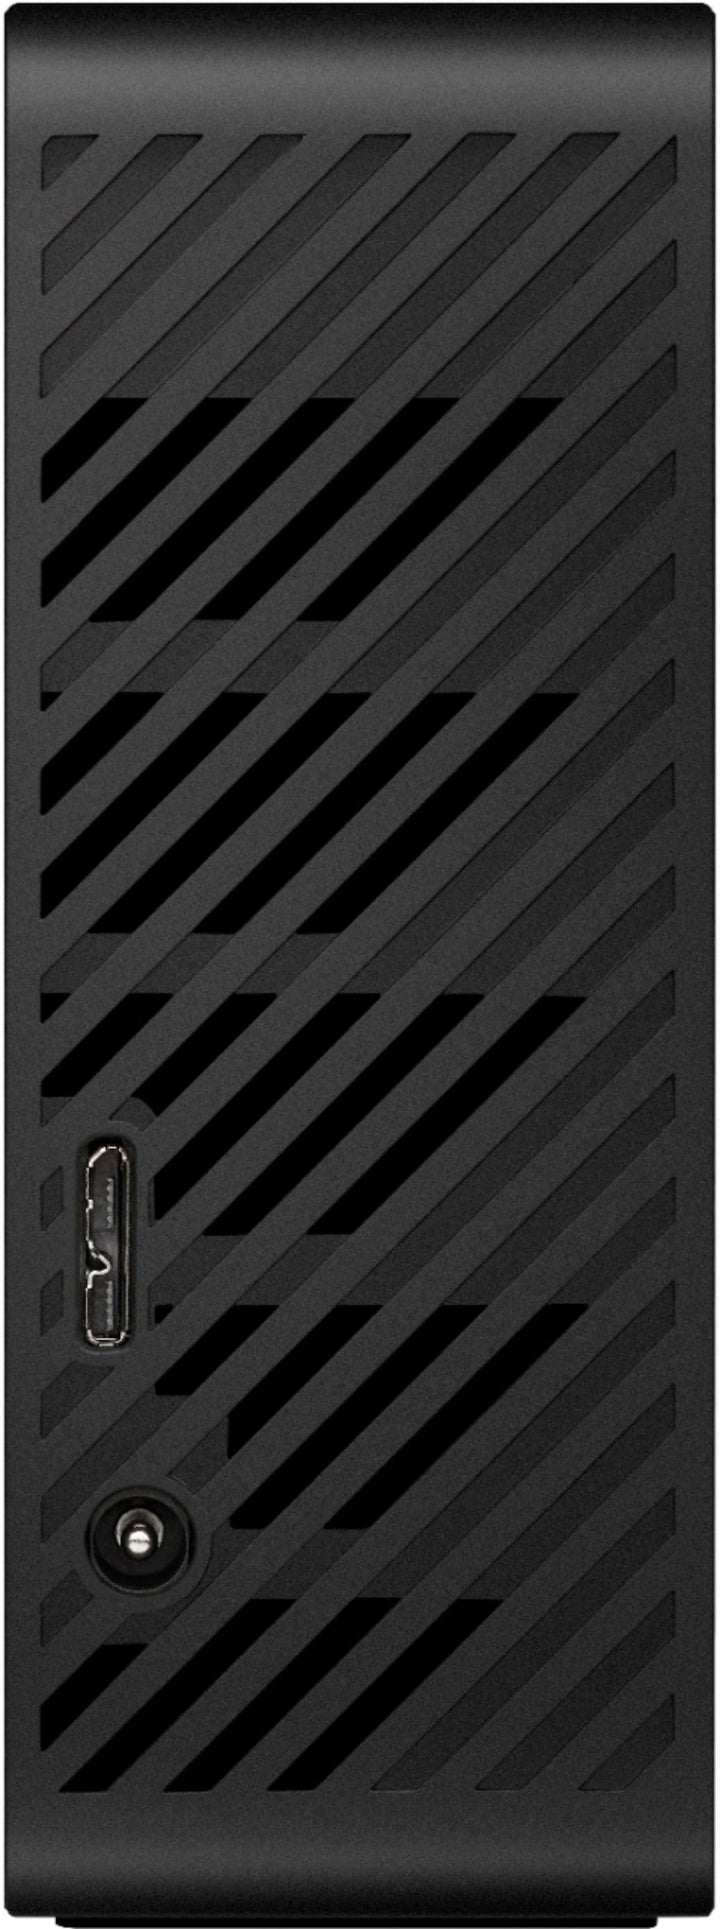 Seagate - Expansion 18TB External USB 3.0 Portable Hard Drive with Rescue Data Recovery Services - Black_1